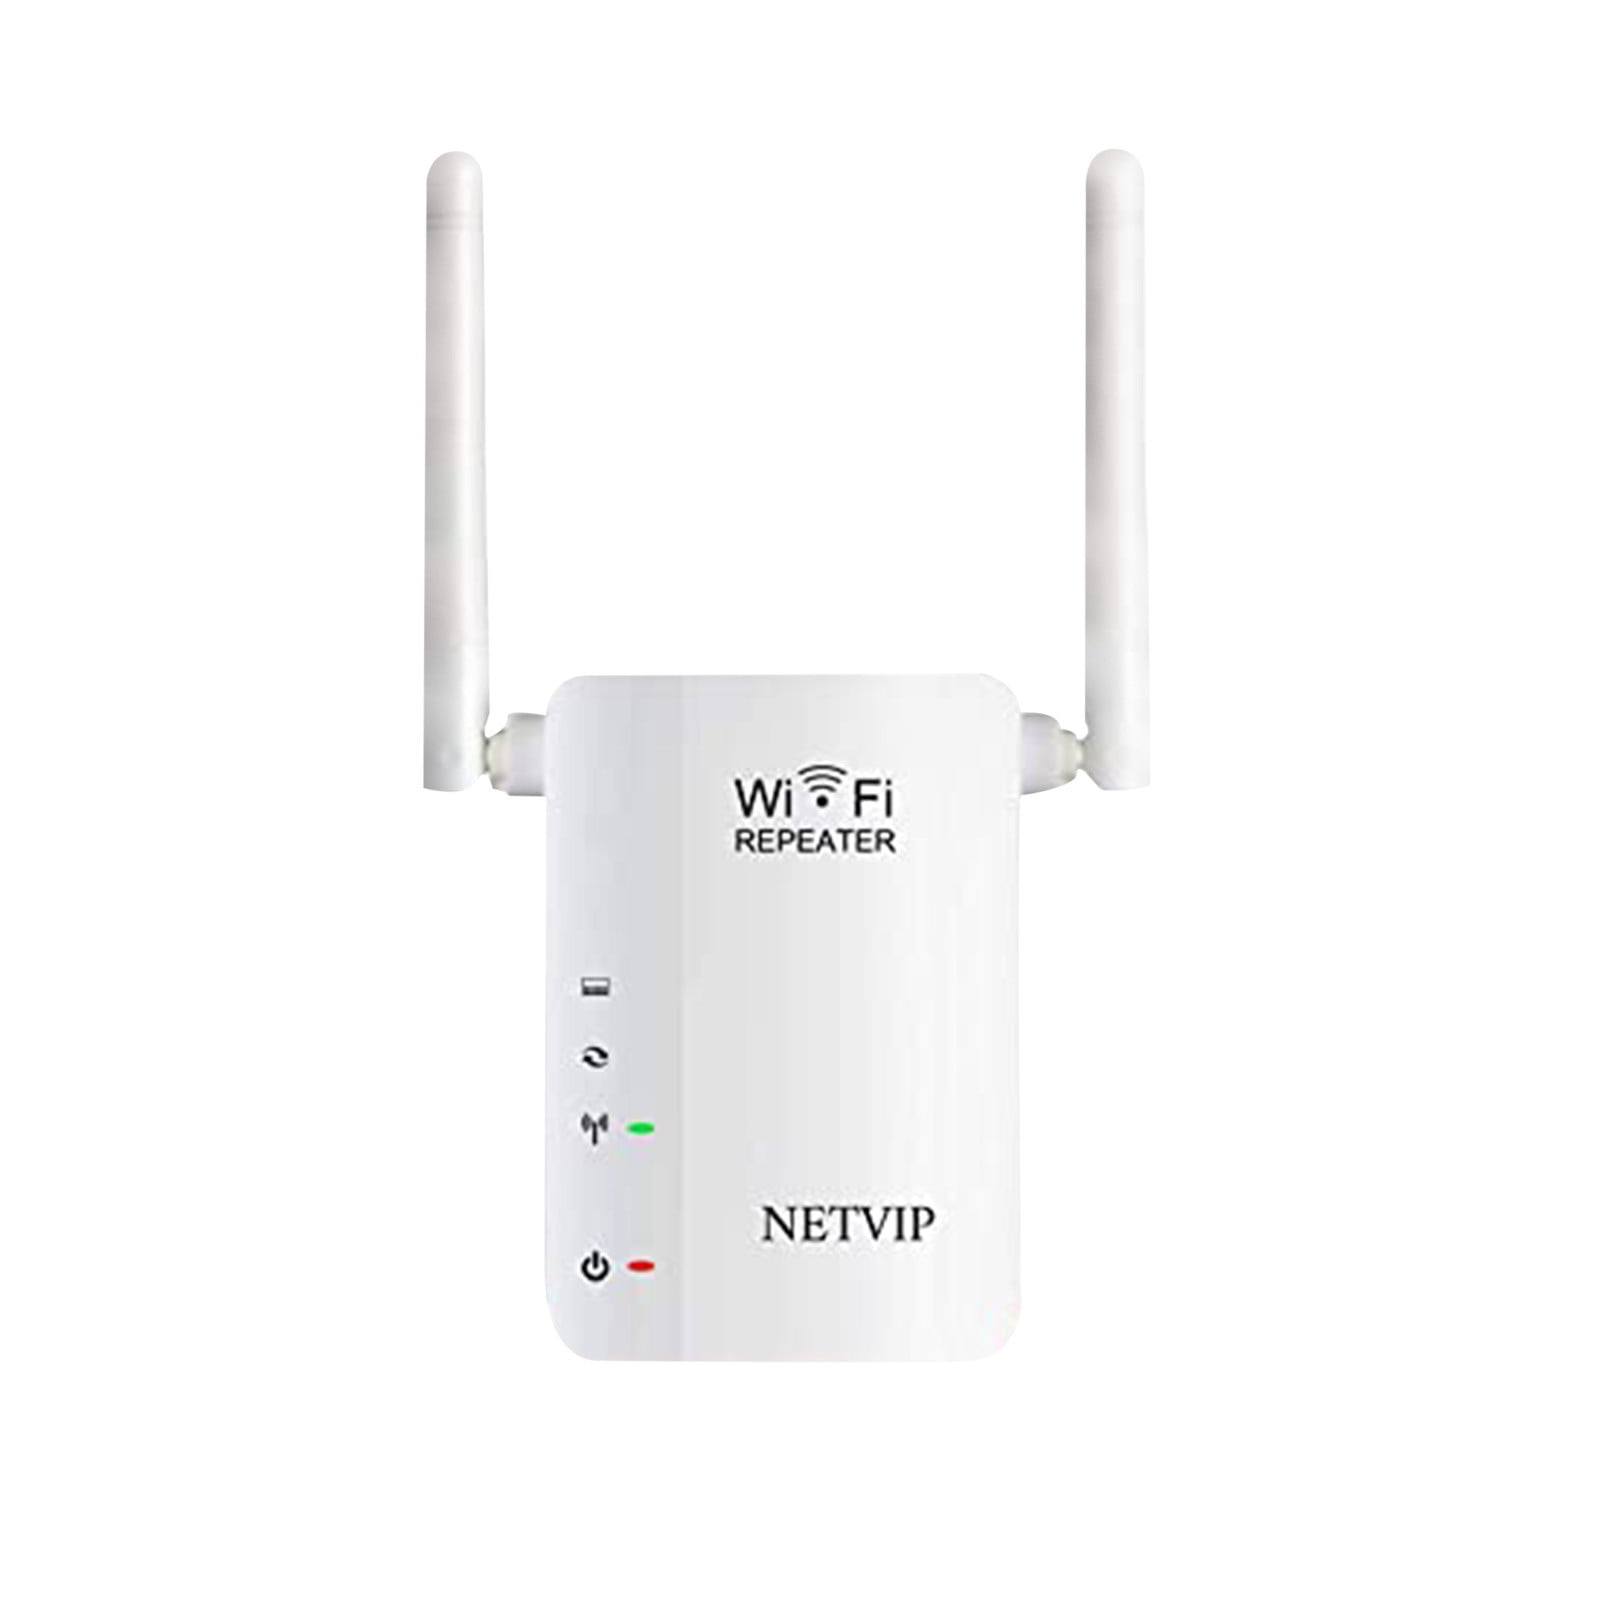 Wireless 300Mbps WiFi Repeater Range Extender Signal Booster Network Router HOT 